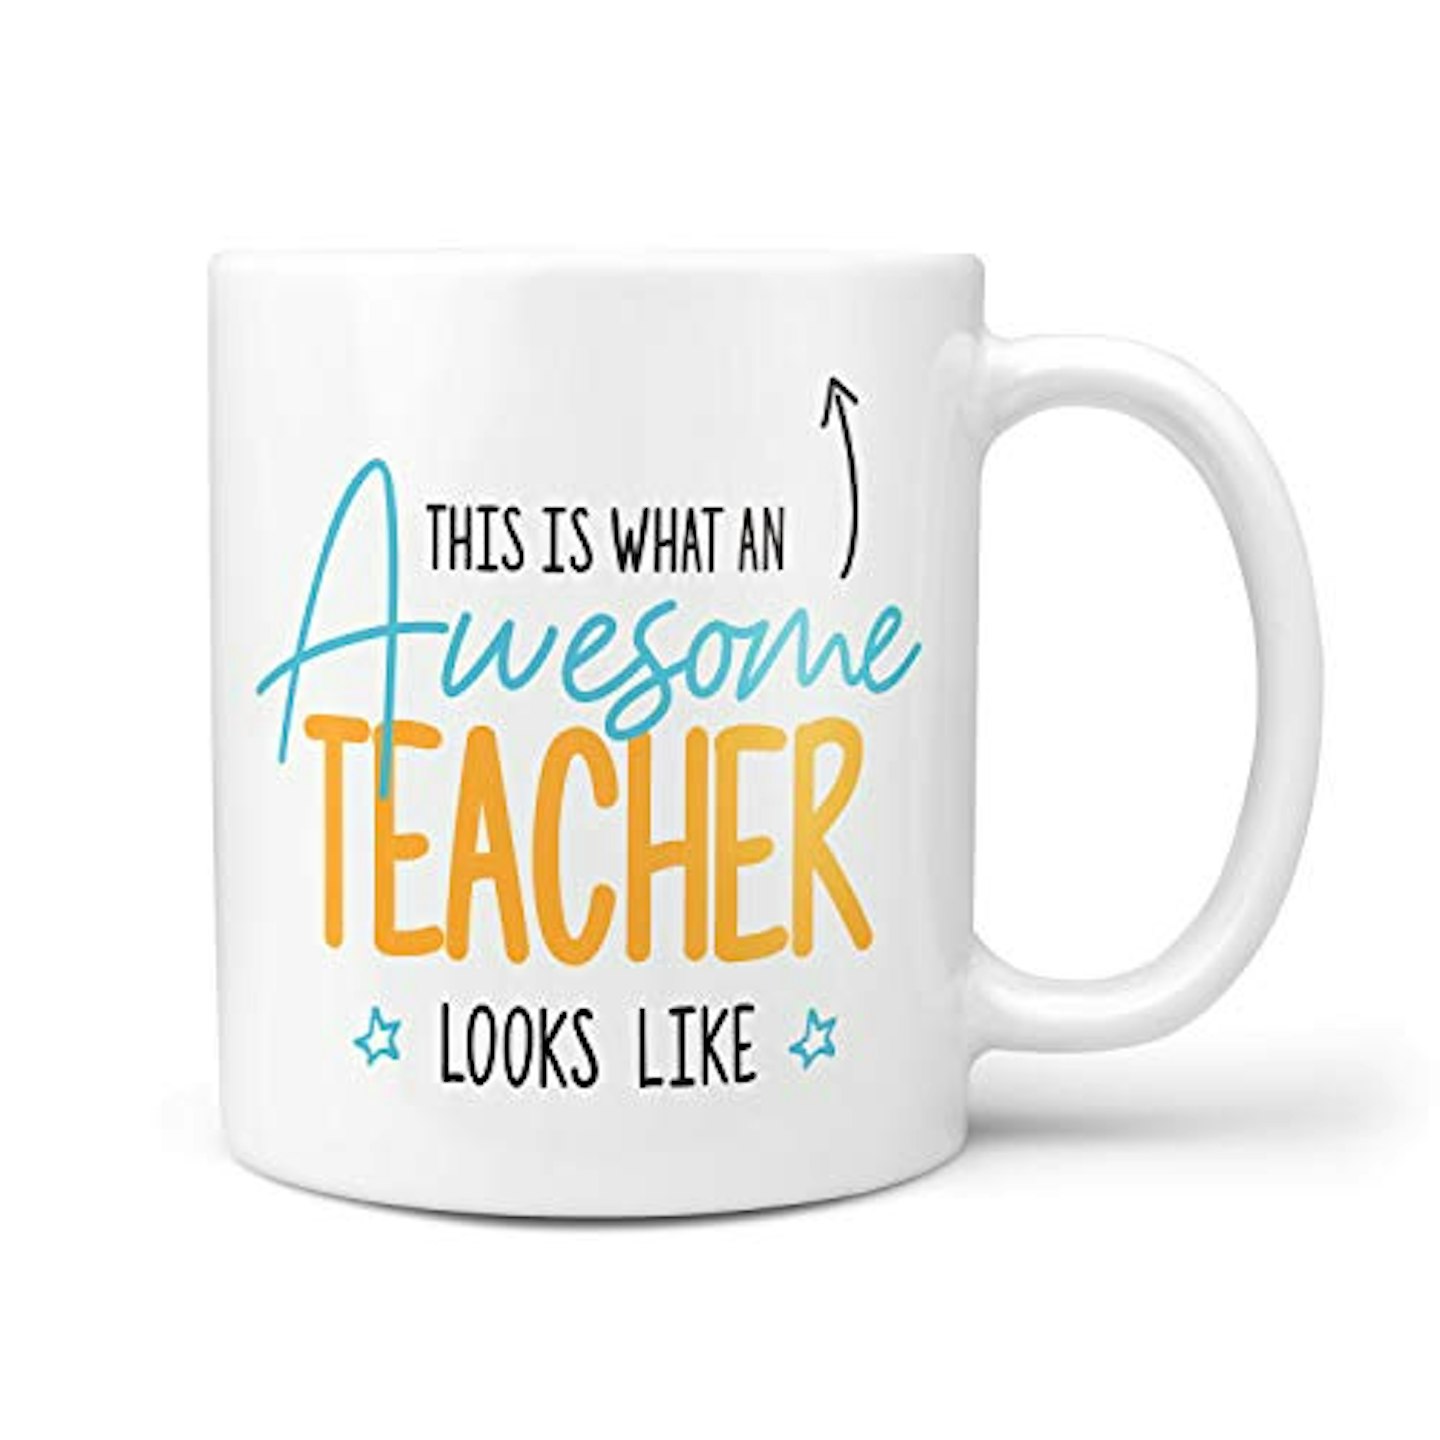 This is What an Awesome Teacher Looks Like Gift Mug